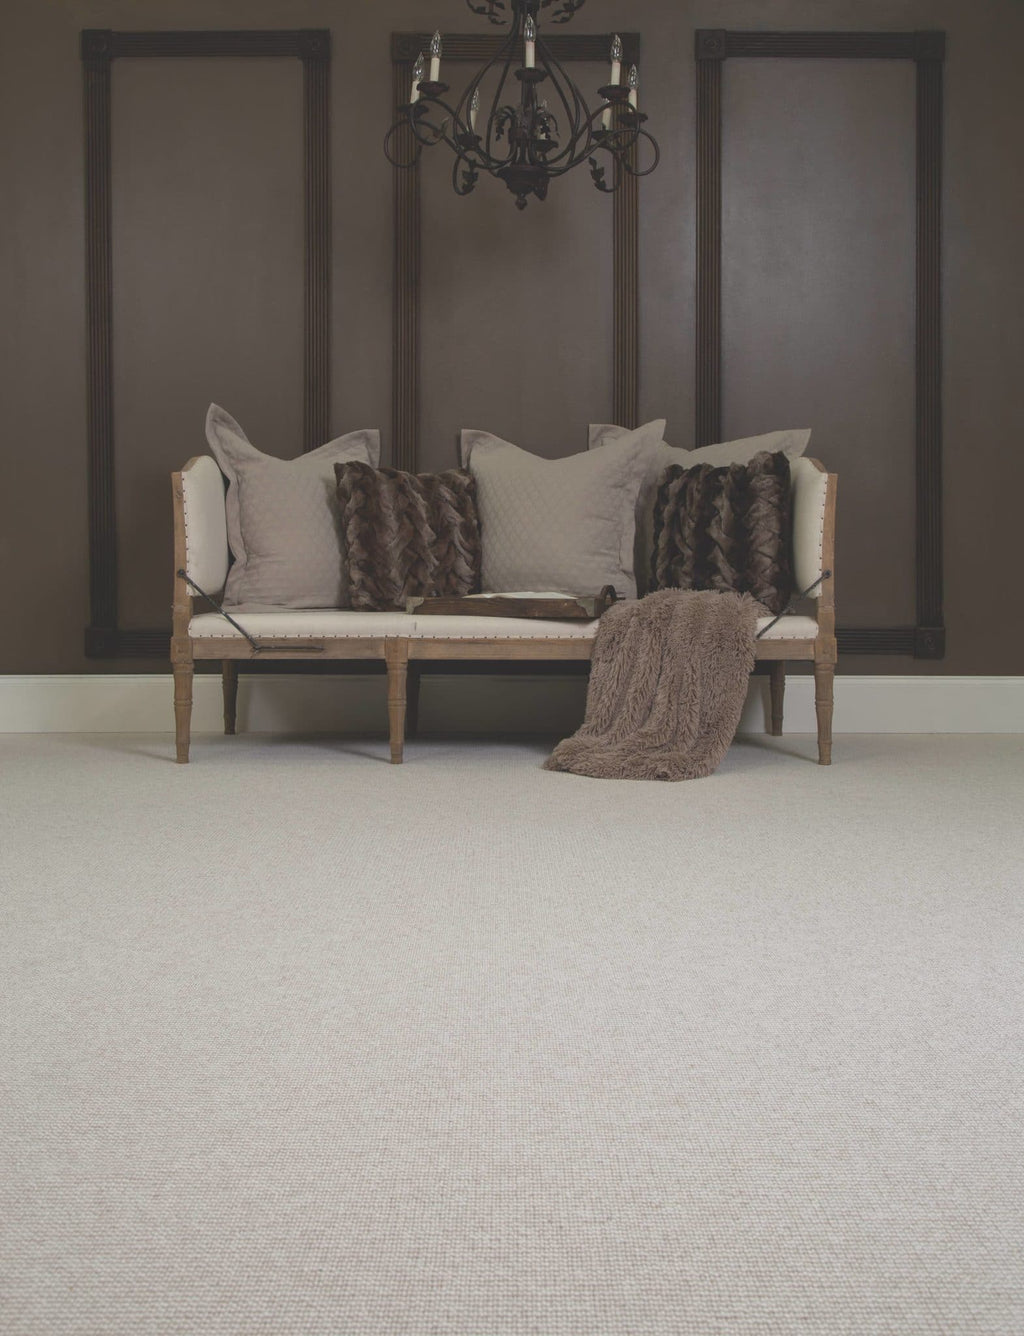 Wool Carpet: Pros and Cons